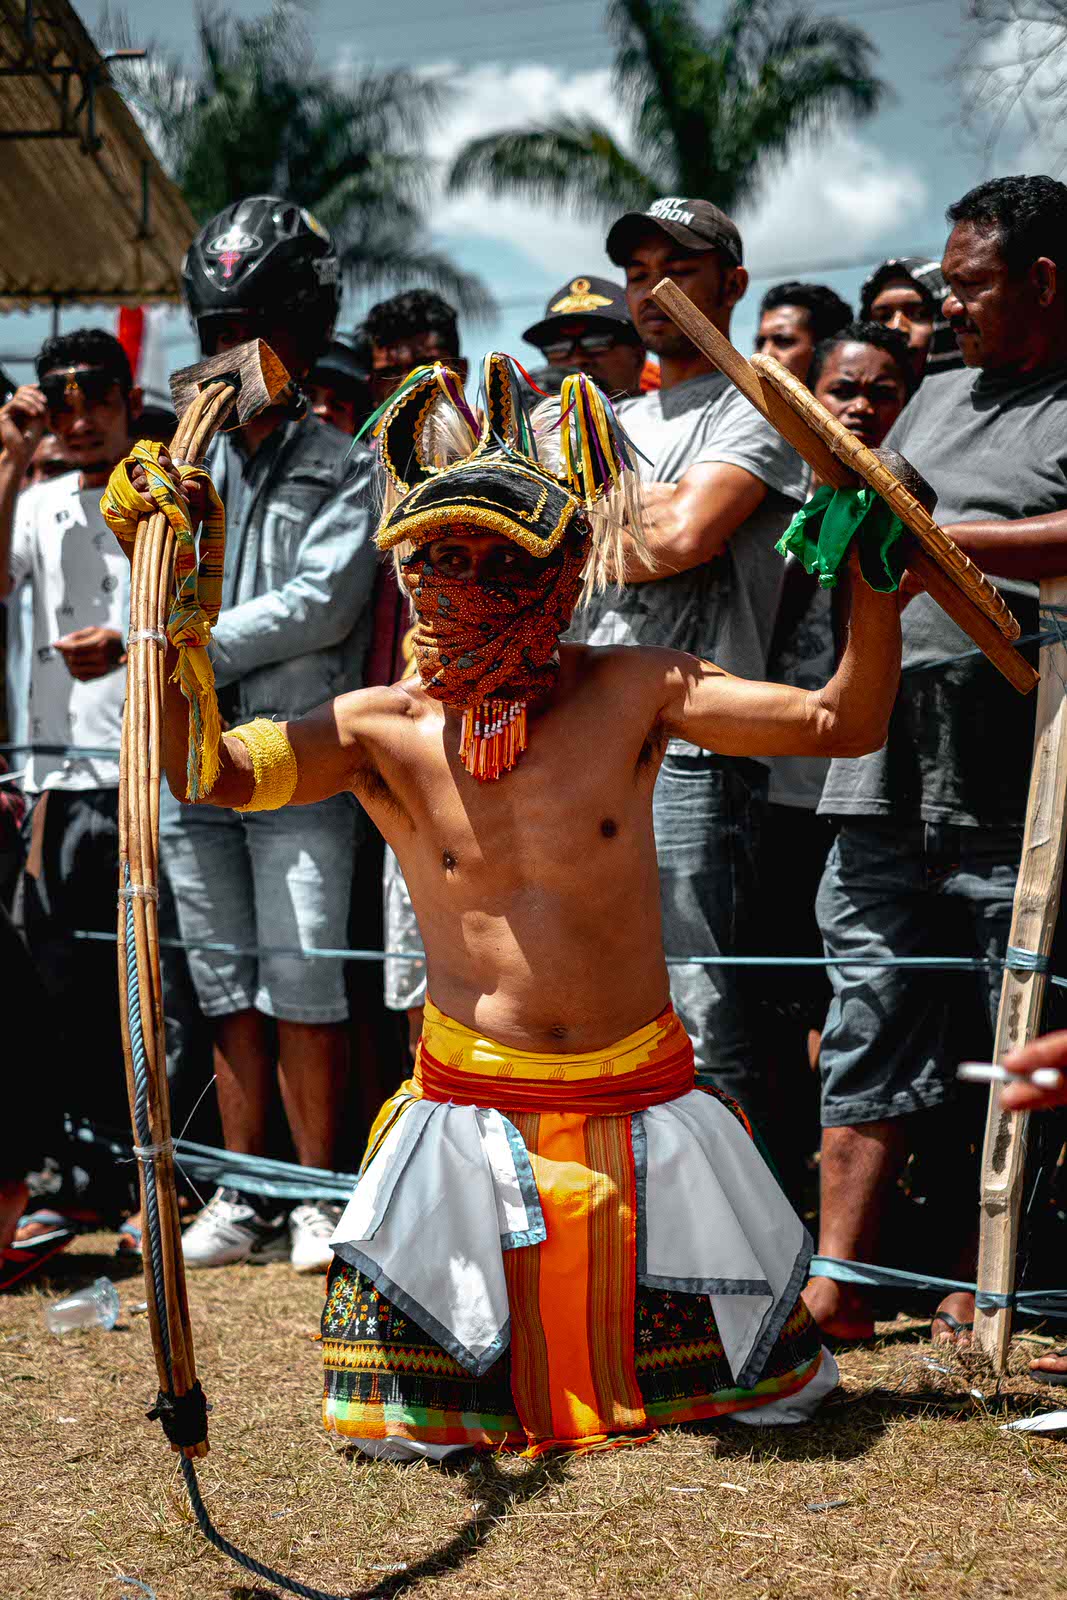 Photos of Manggarai Warrior Caci Whip Fights in Flores, Indonesia ...